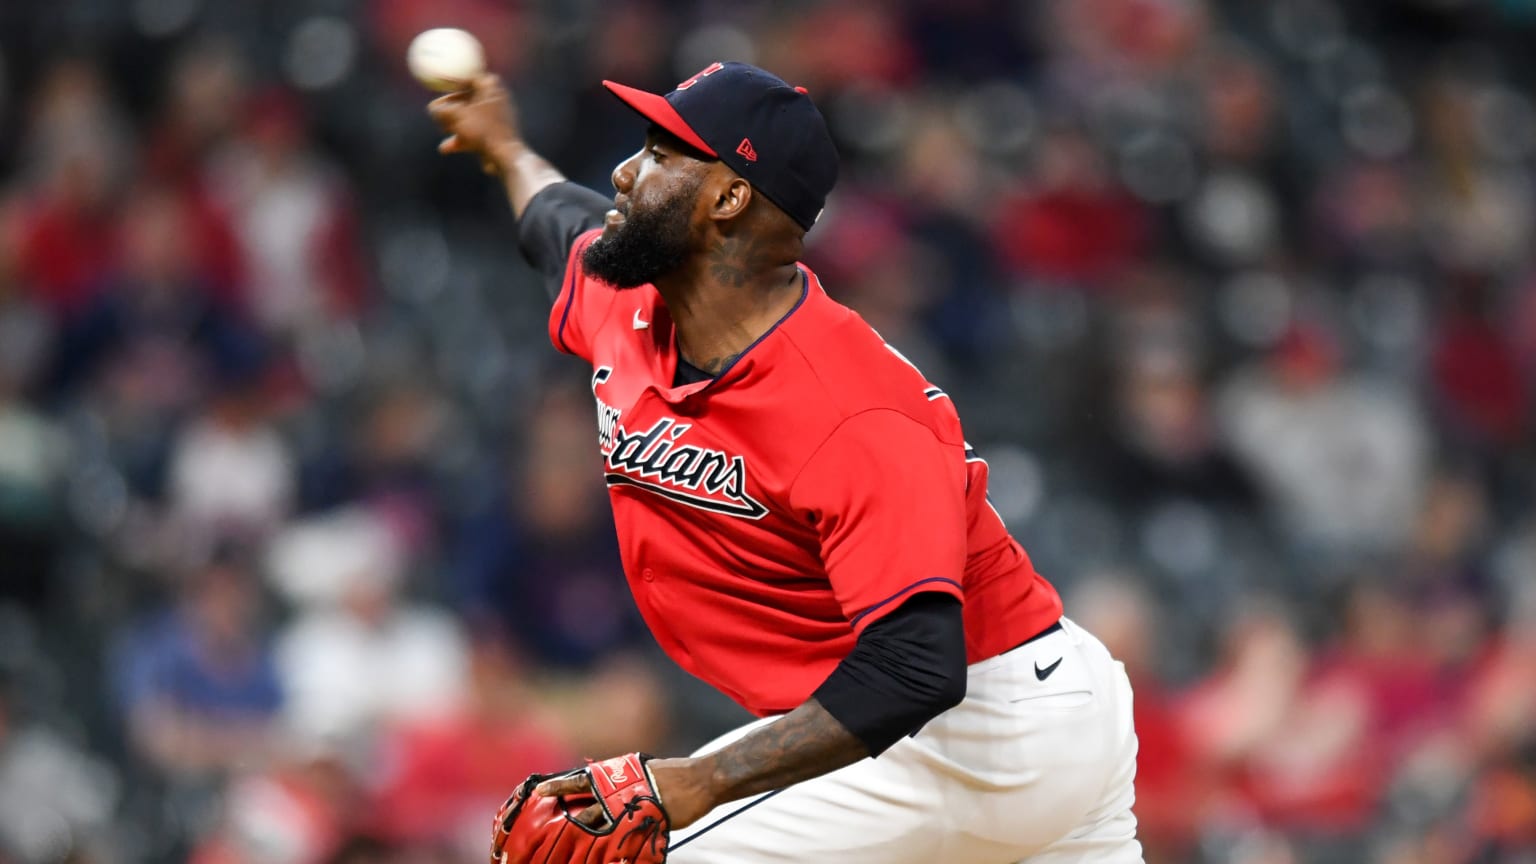 Enyel De Los Santos releases a pitch in the Guardians' red alternate jersey